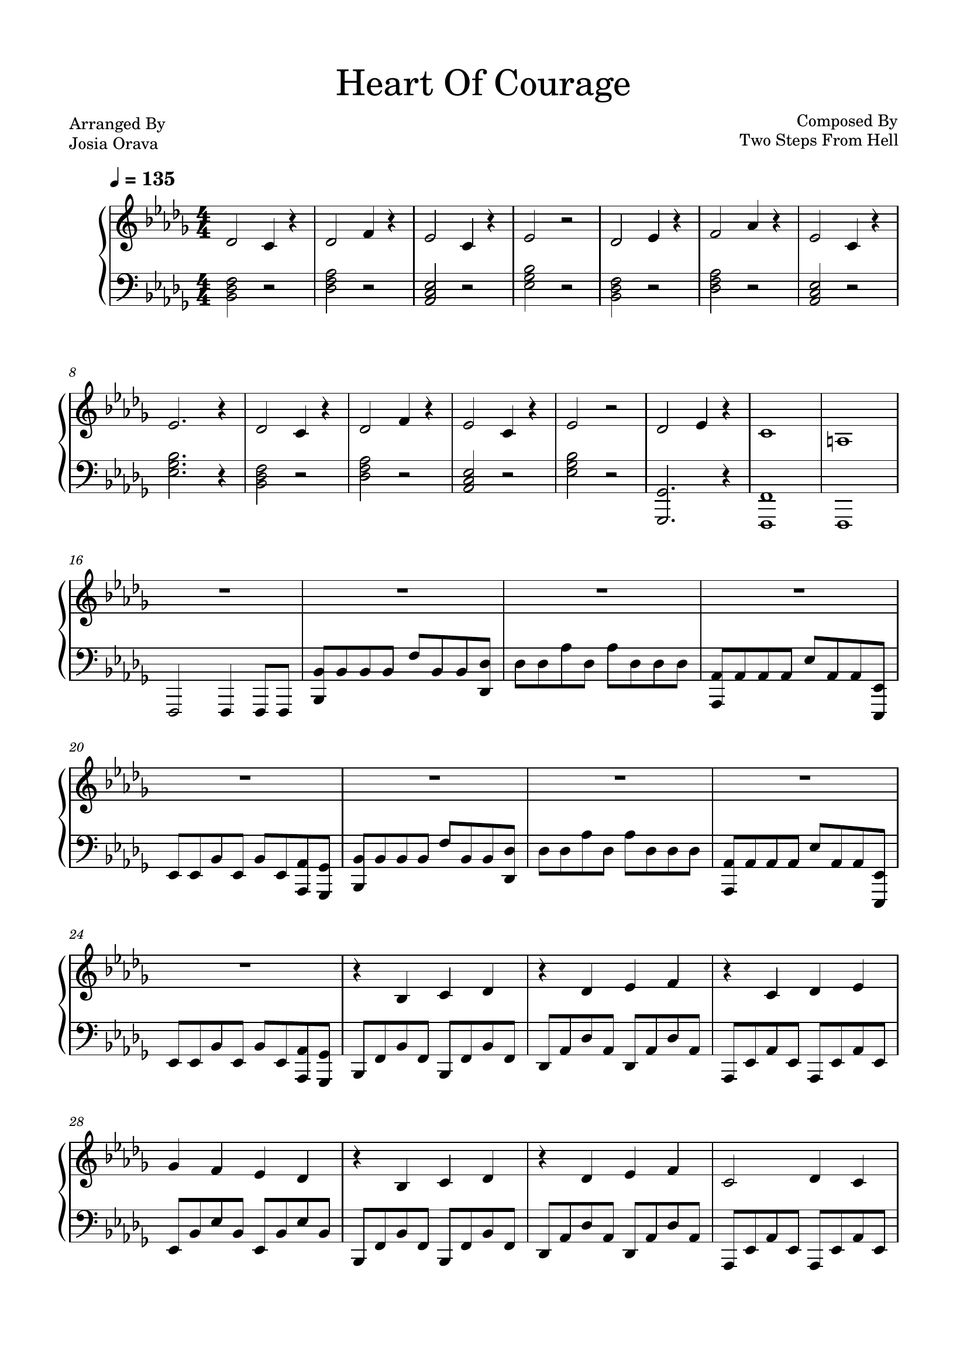 Two Steps From Hell - Heart Of Courage (Piano Sheet) by Josia Orava